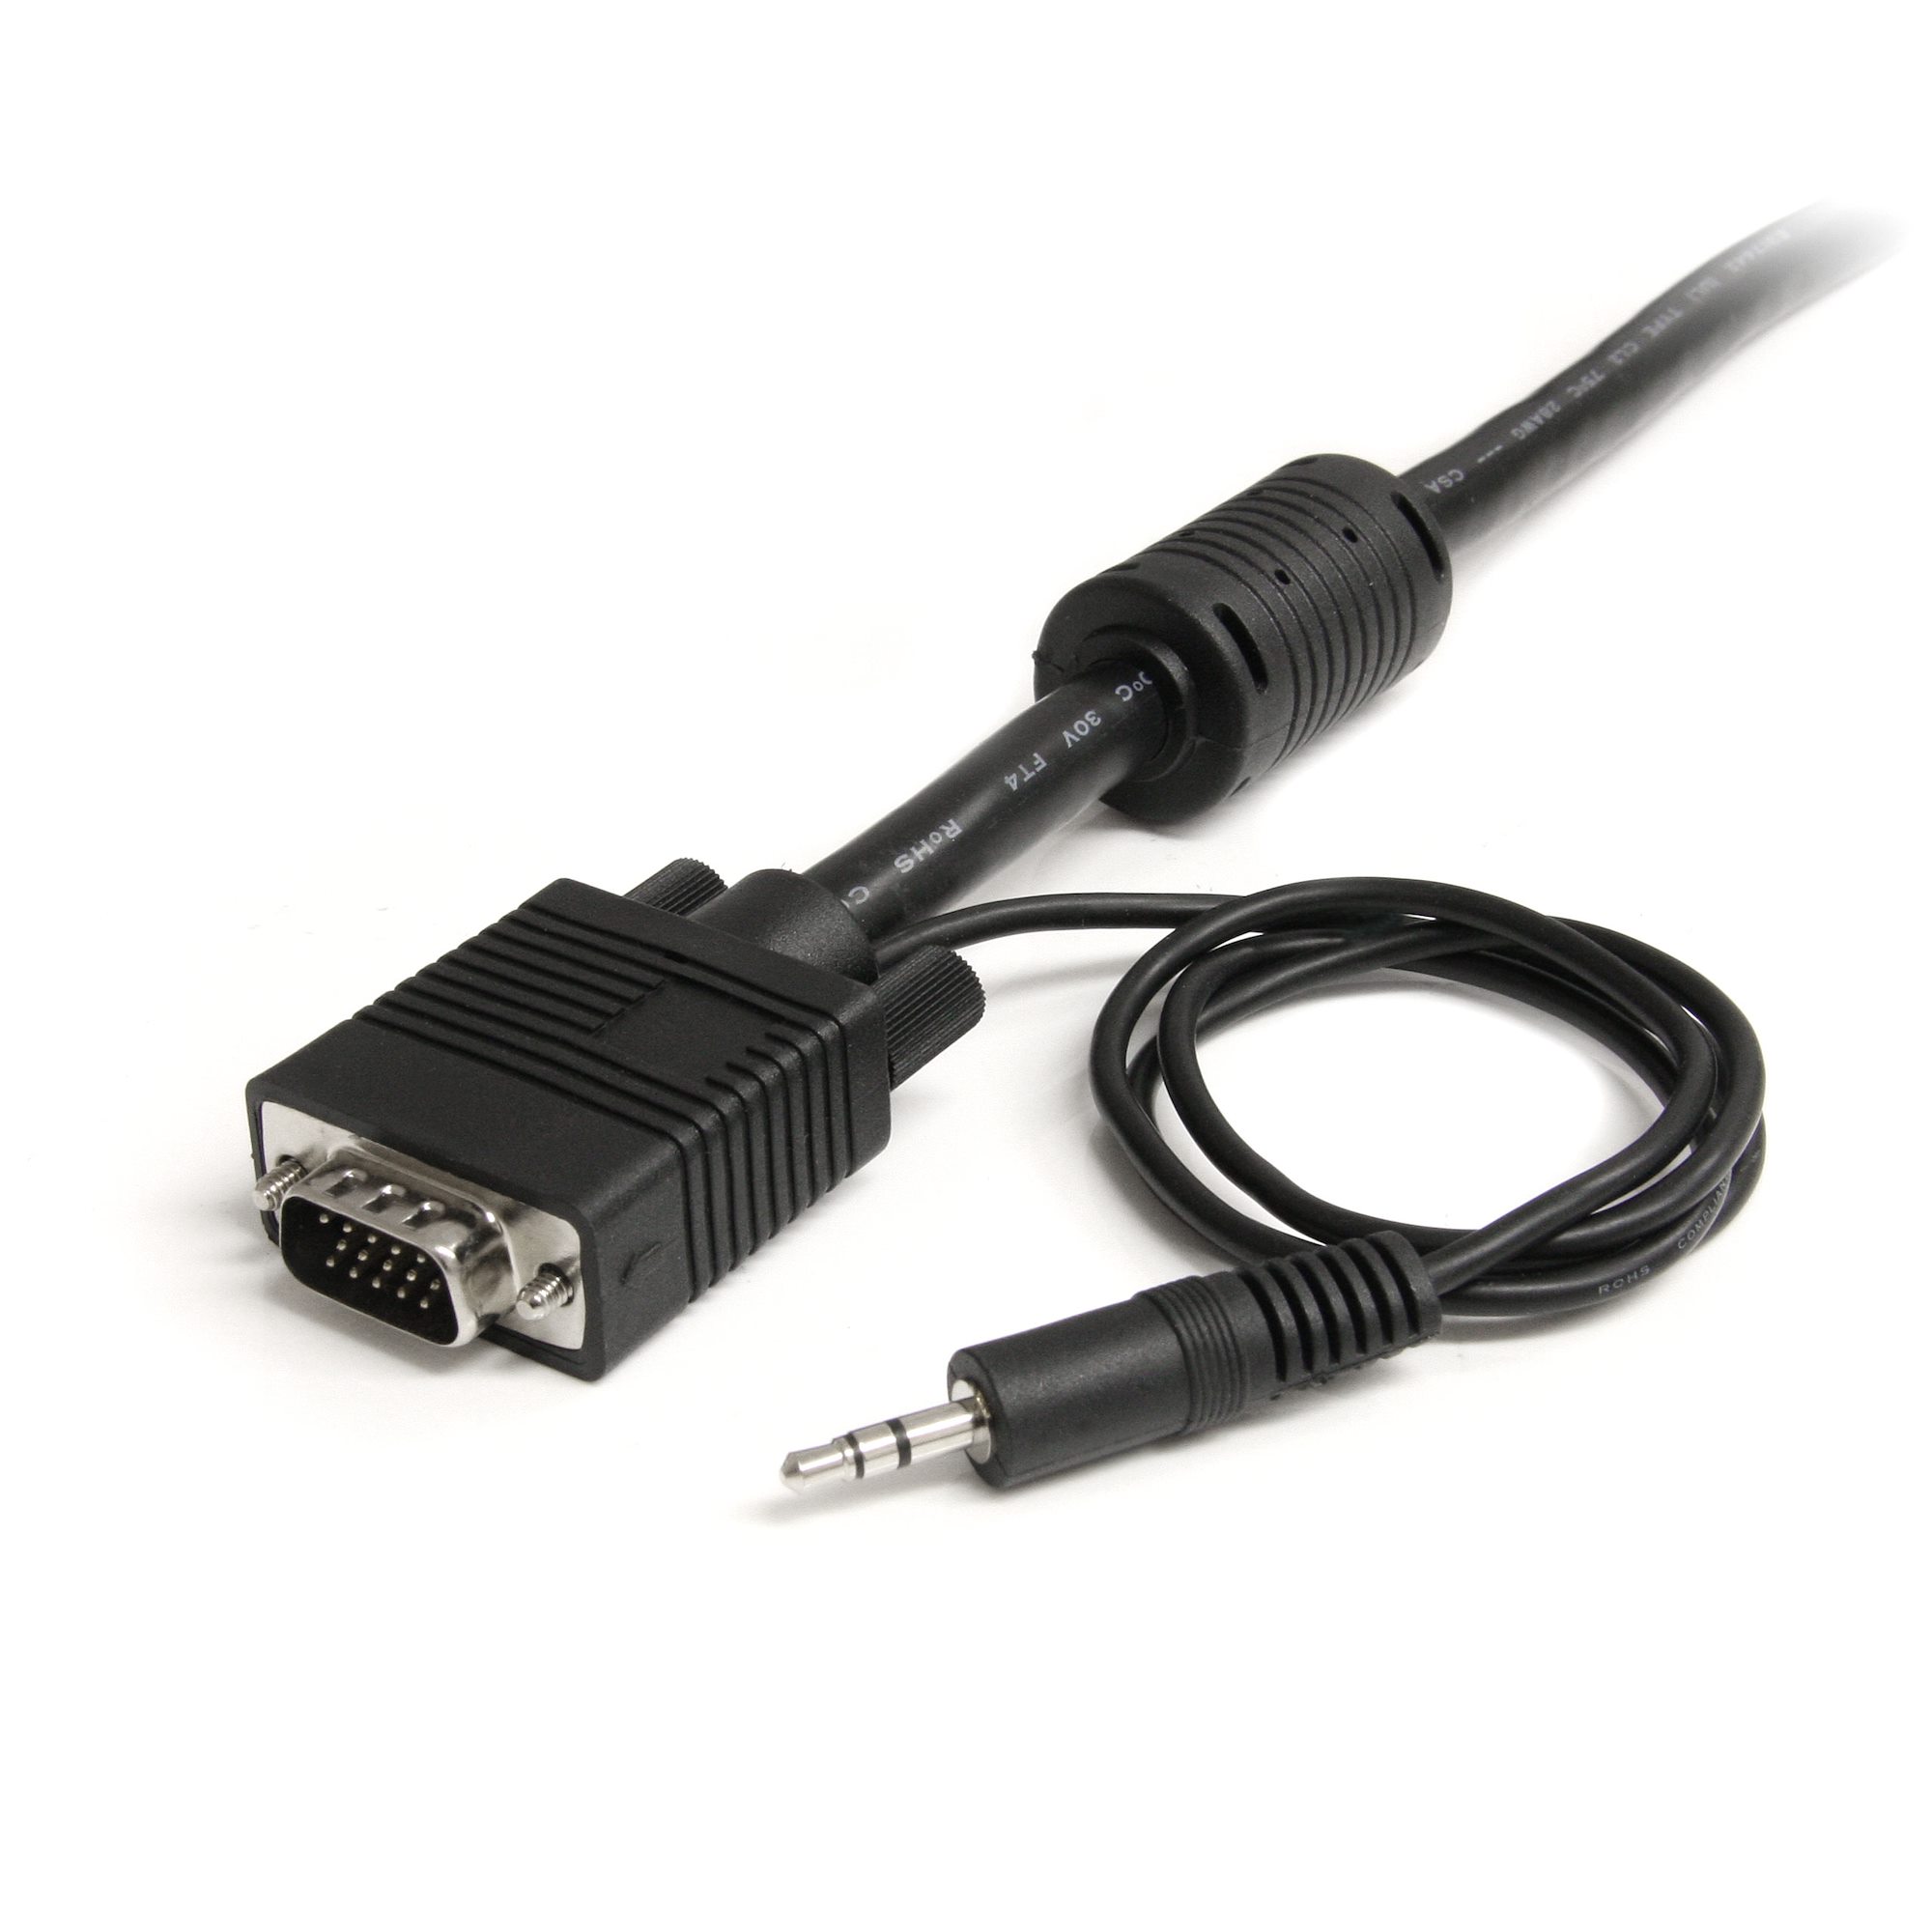 25ft 30ft VGA & AUDIO LEAD HD15 PLUG TO PLUG WITH 3.5MM STEREO LCD Monitor Cable 